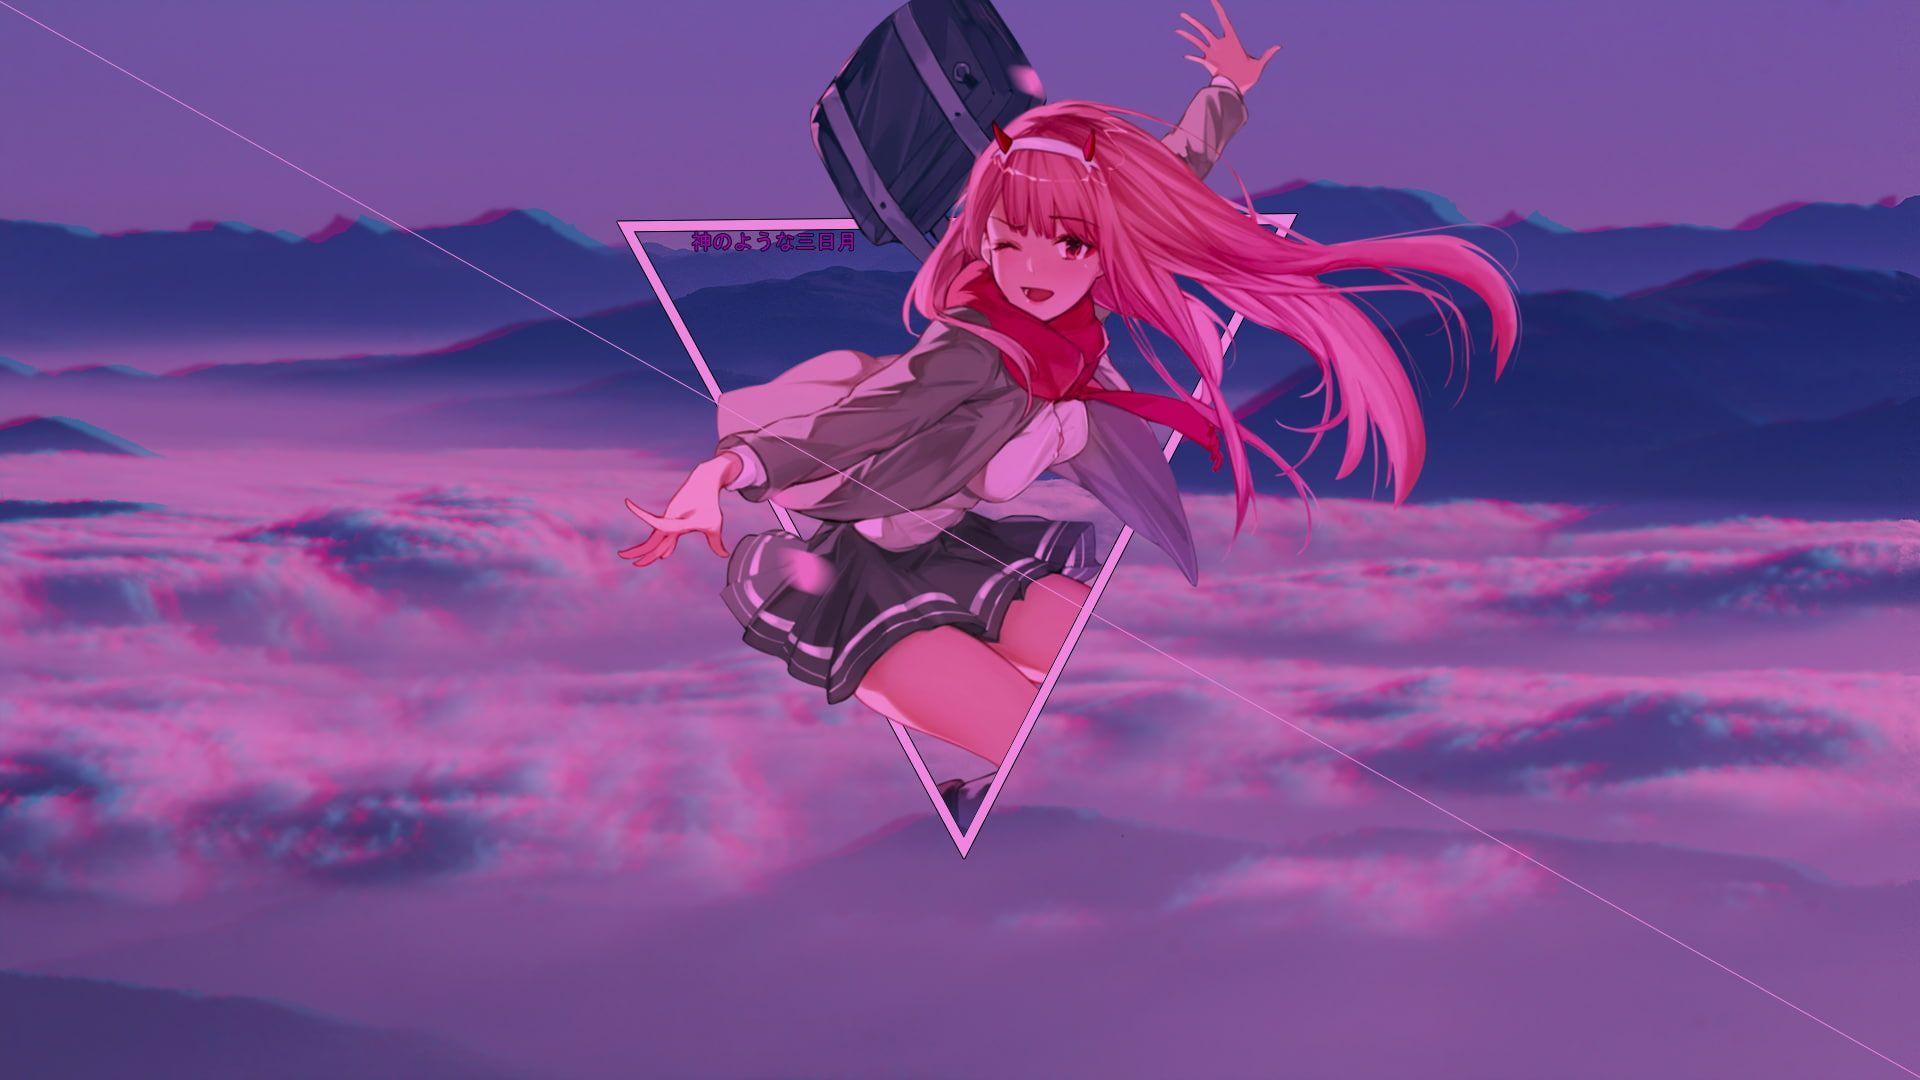 1920x1080 Zero Two (Darling In The FranXX) Darling In The FranXX #picture In Picture #blurred P #wallpa.  Hình nền Anime Iphone, Hình nền Anime, Darling In The Franxx